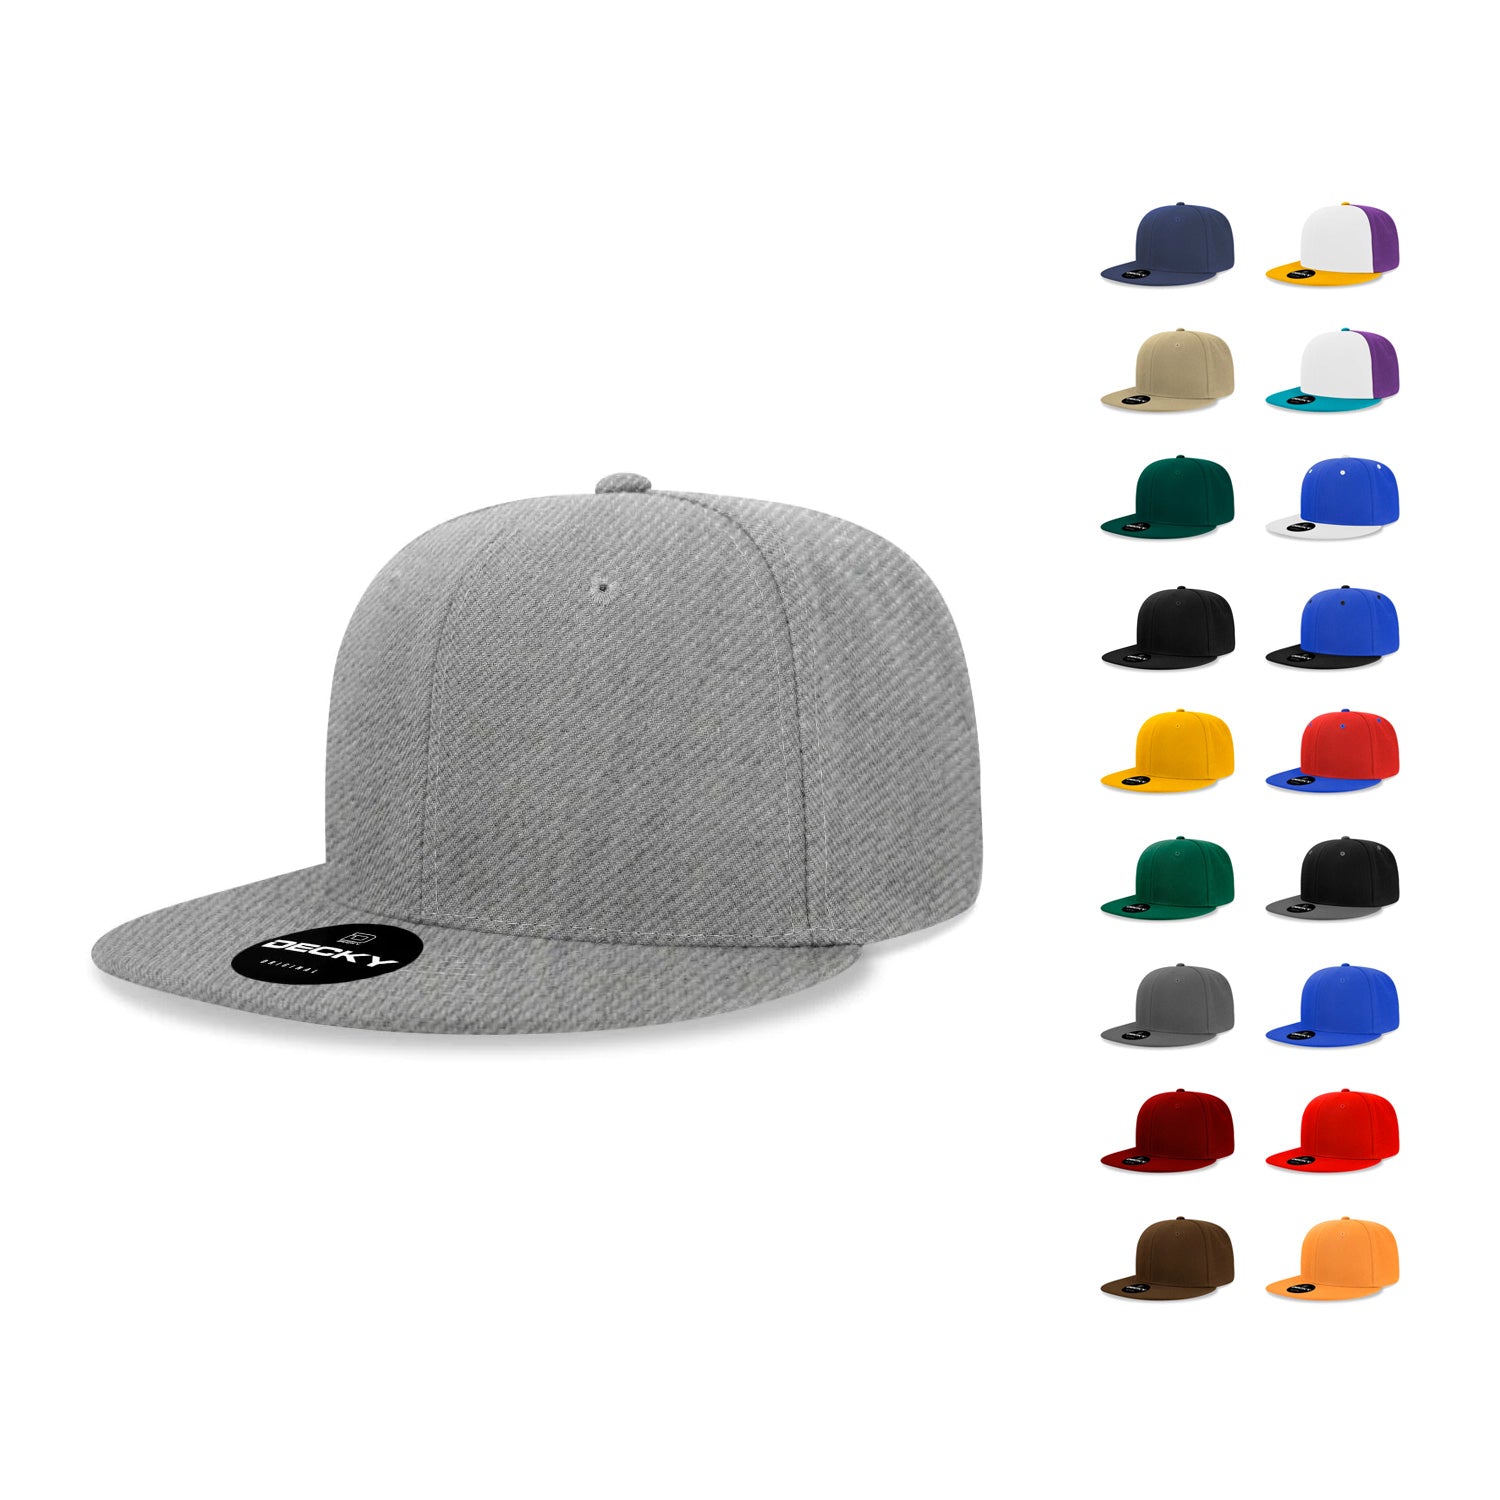 Decky 6020 Hats Structure Bill Flat 6 Caps Panel Profile High Snapback